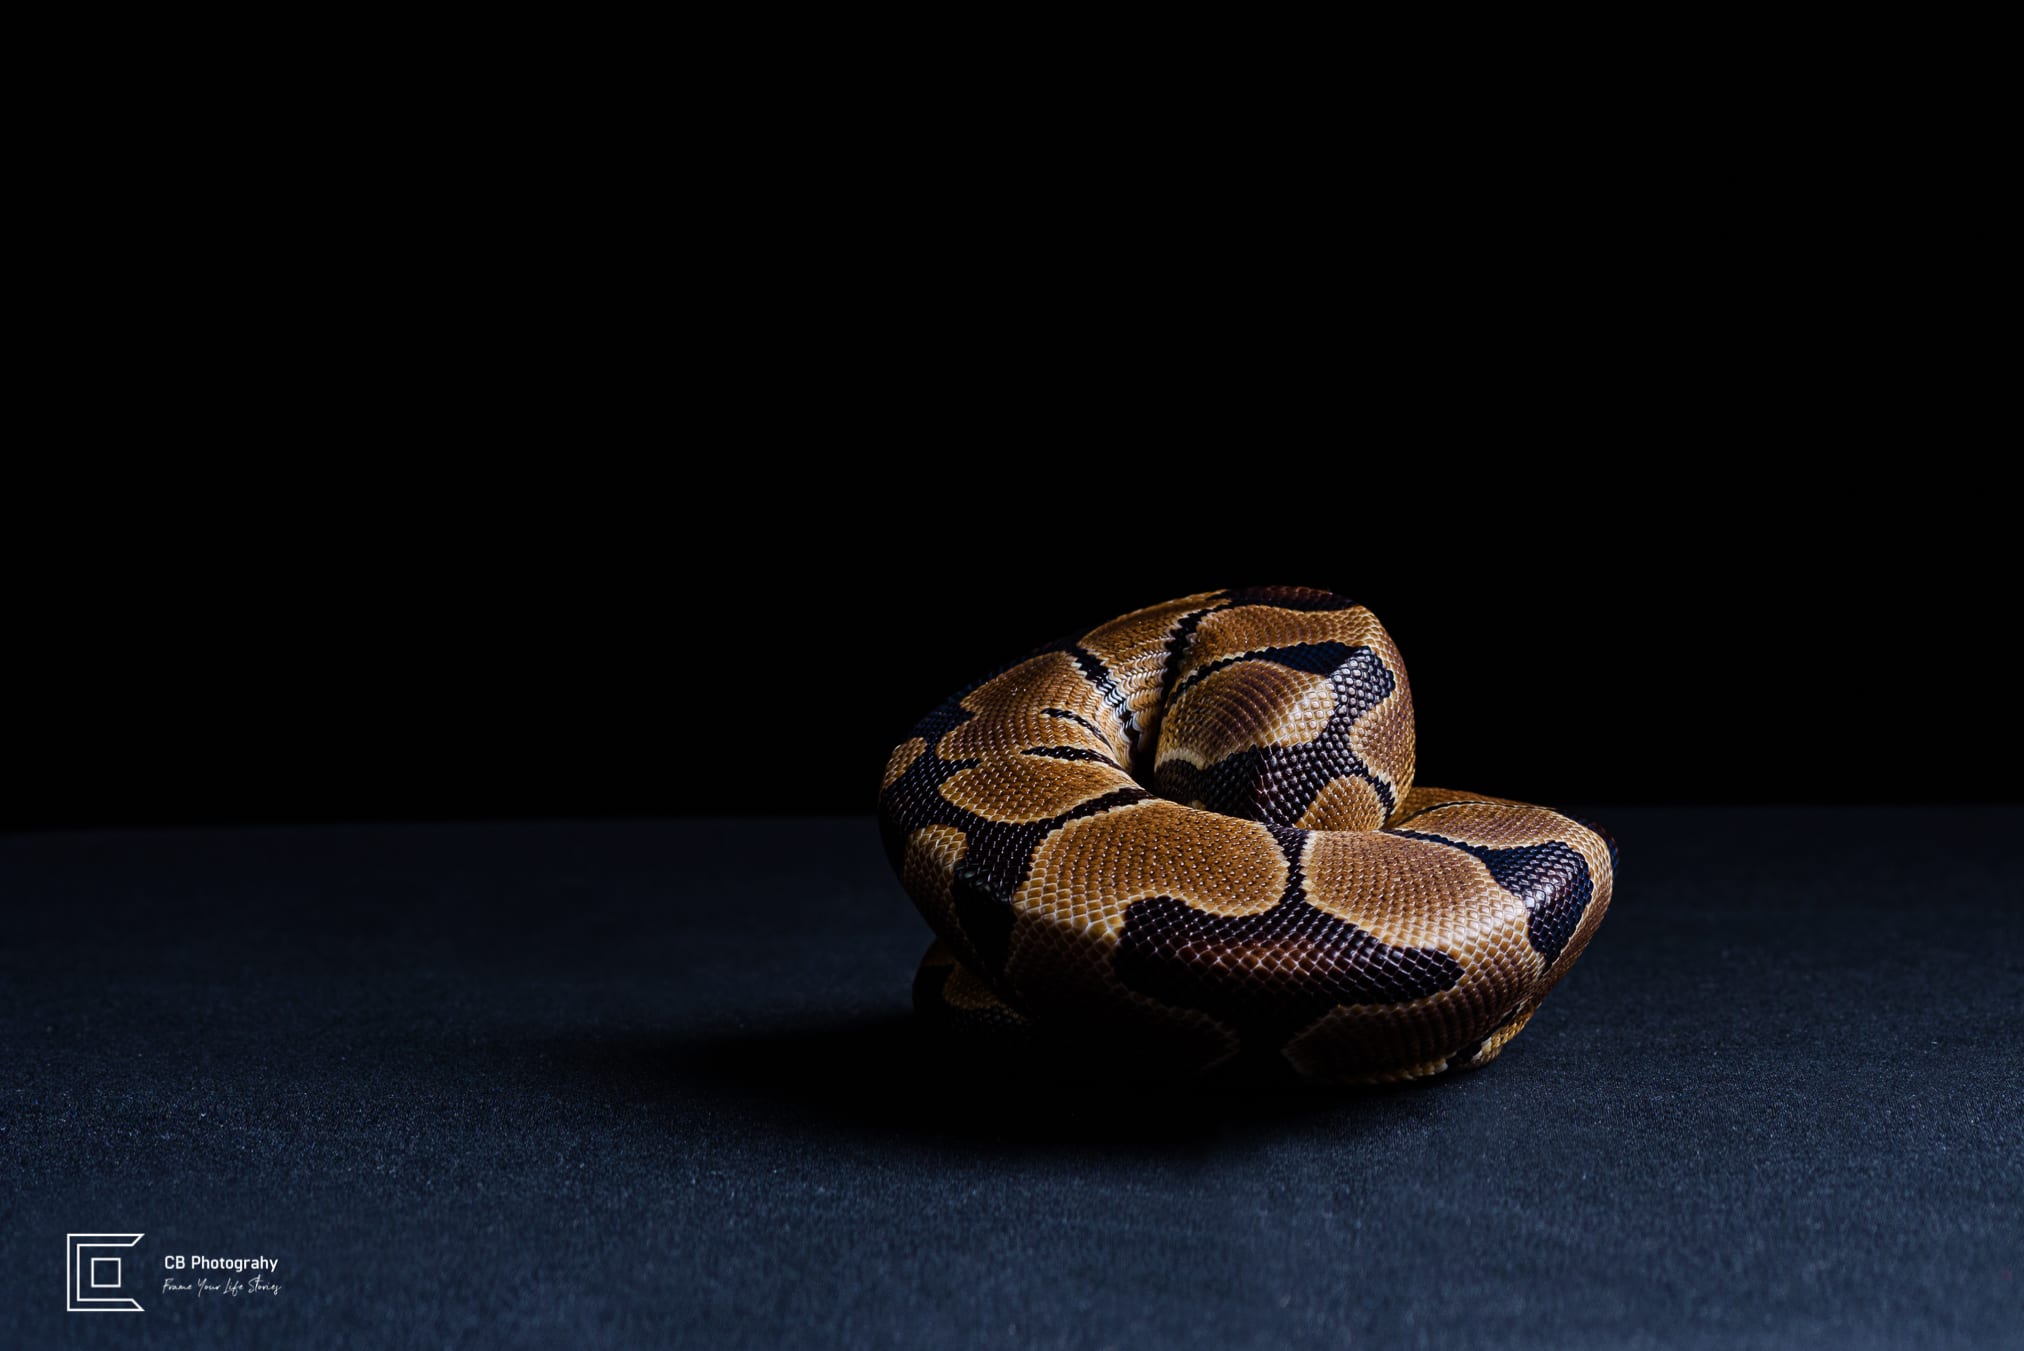 Pet photographer in BGC: Snake-coiled, image taken in a photo studio by Cristian Bucur